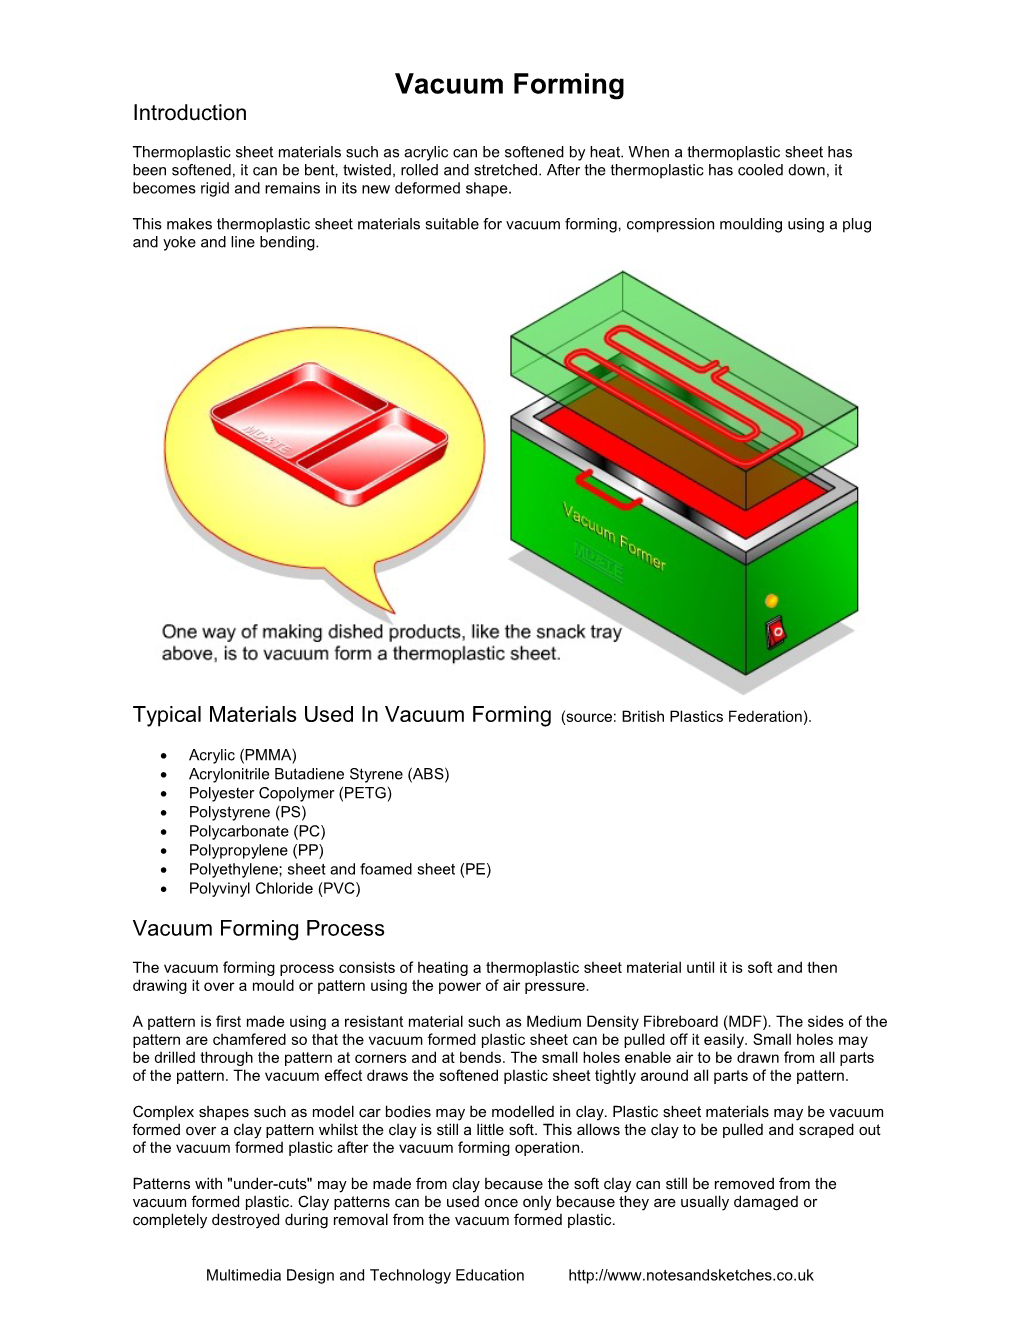 Vacuum Forming Introduction